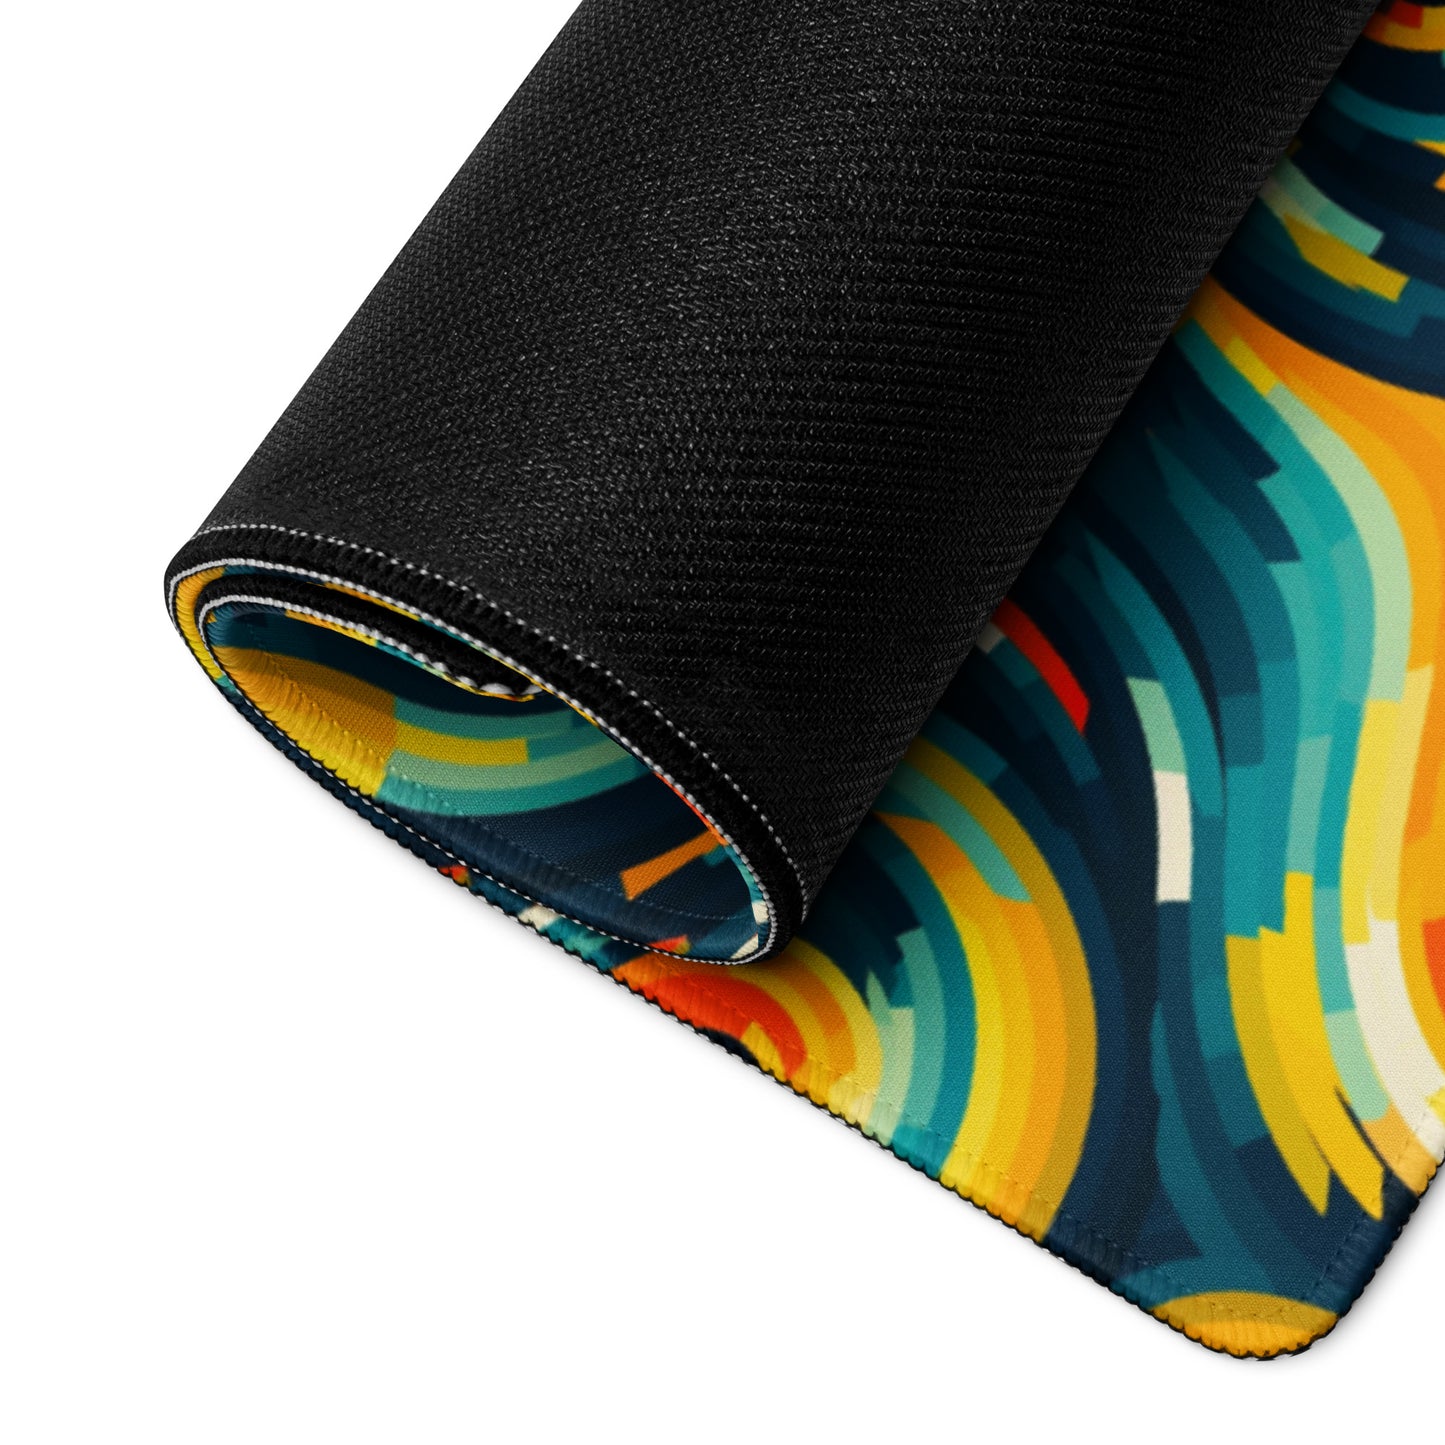  A 36" x 18" desk pad with swirls all over it rolled up. Yellow and Blue in color.